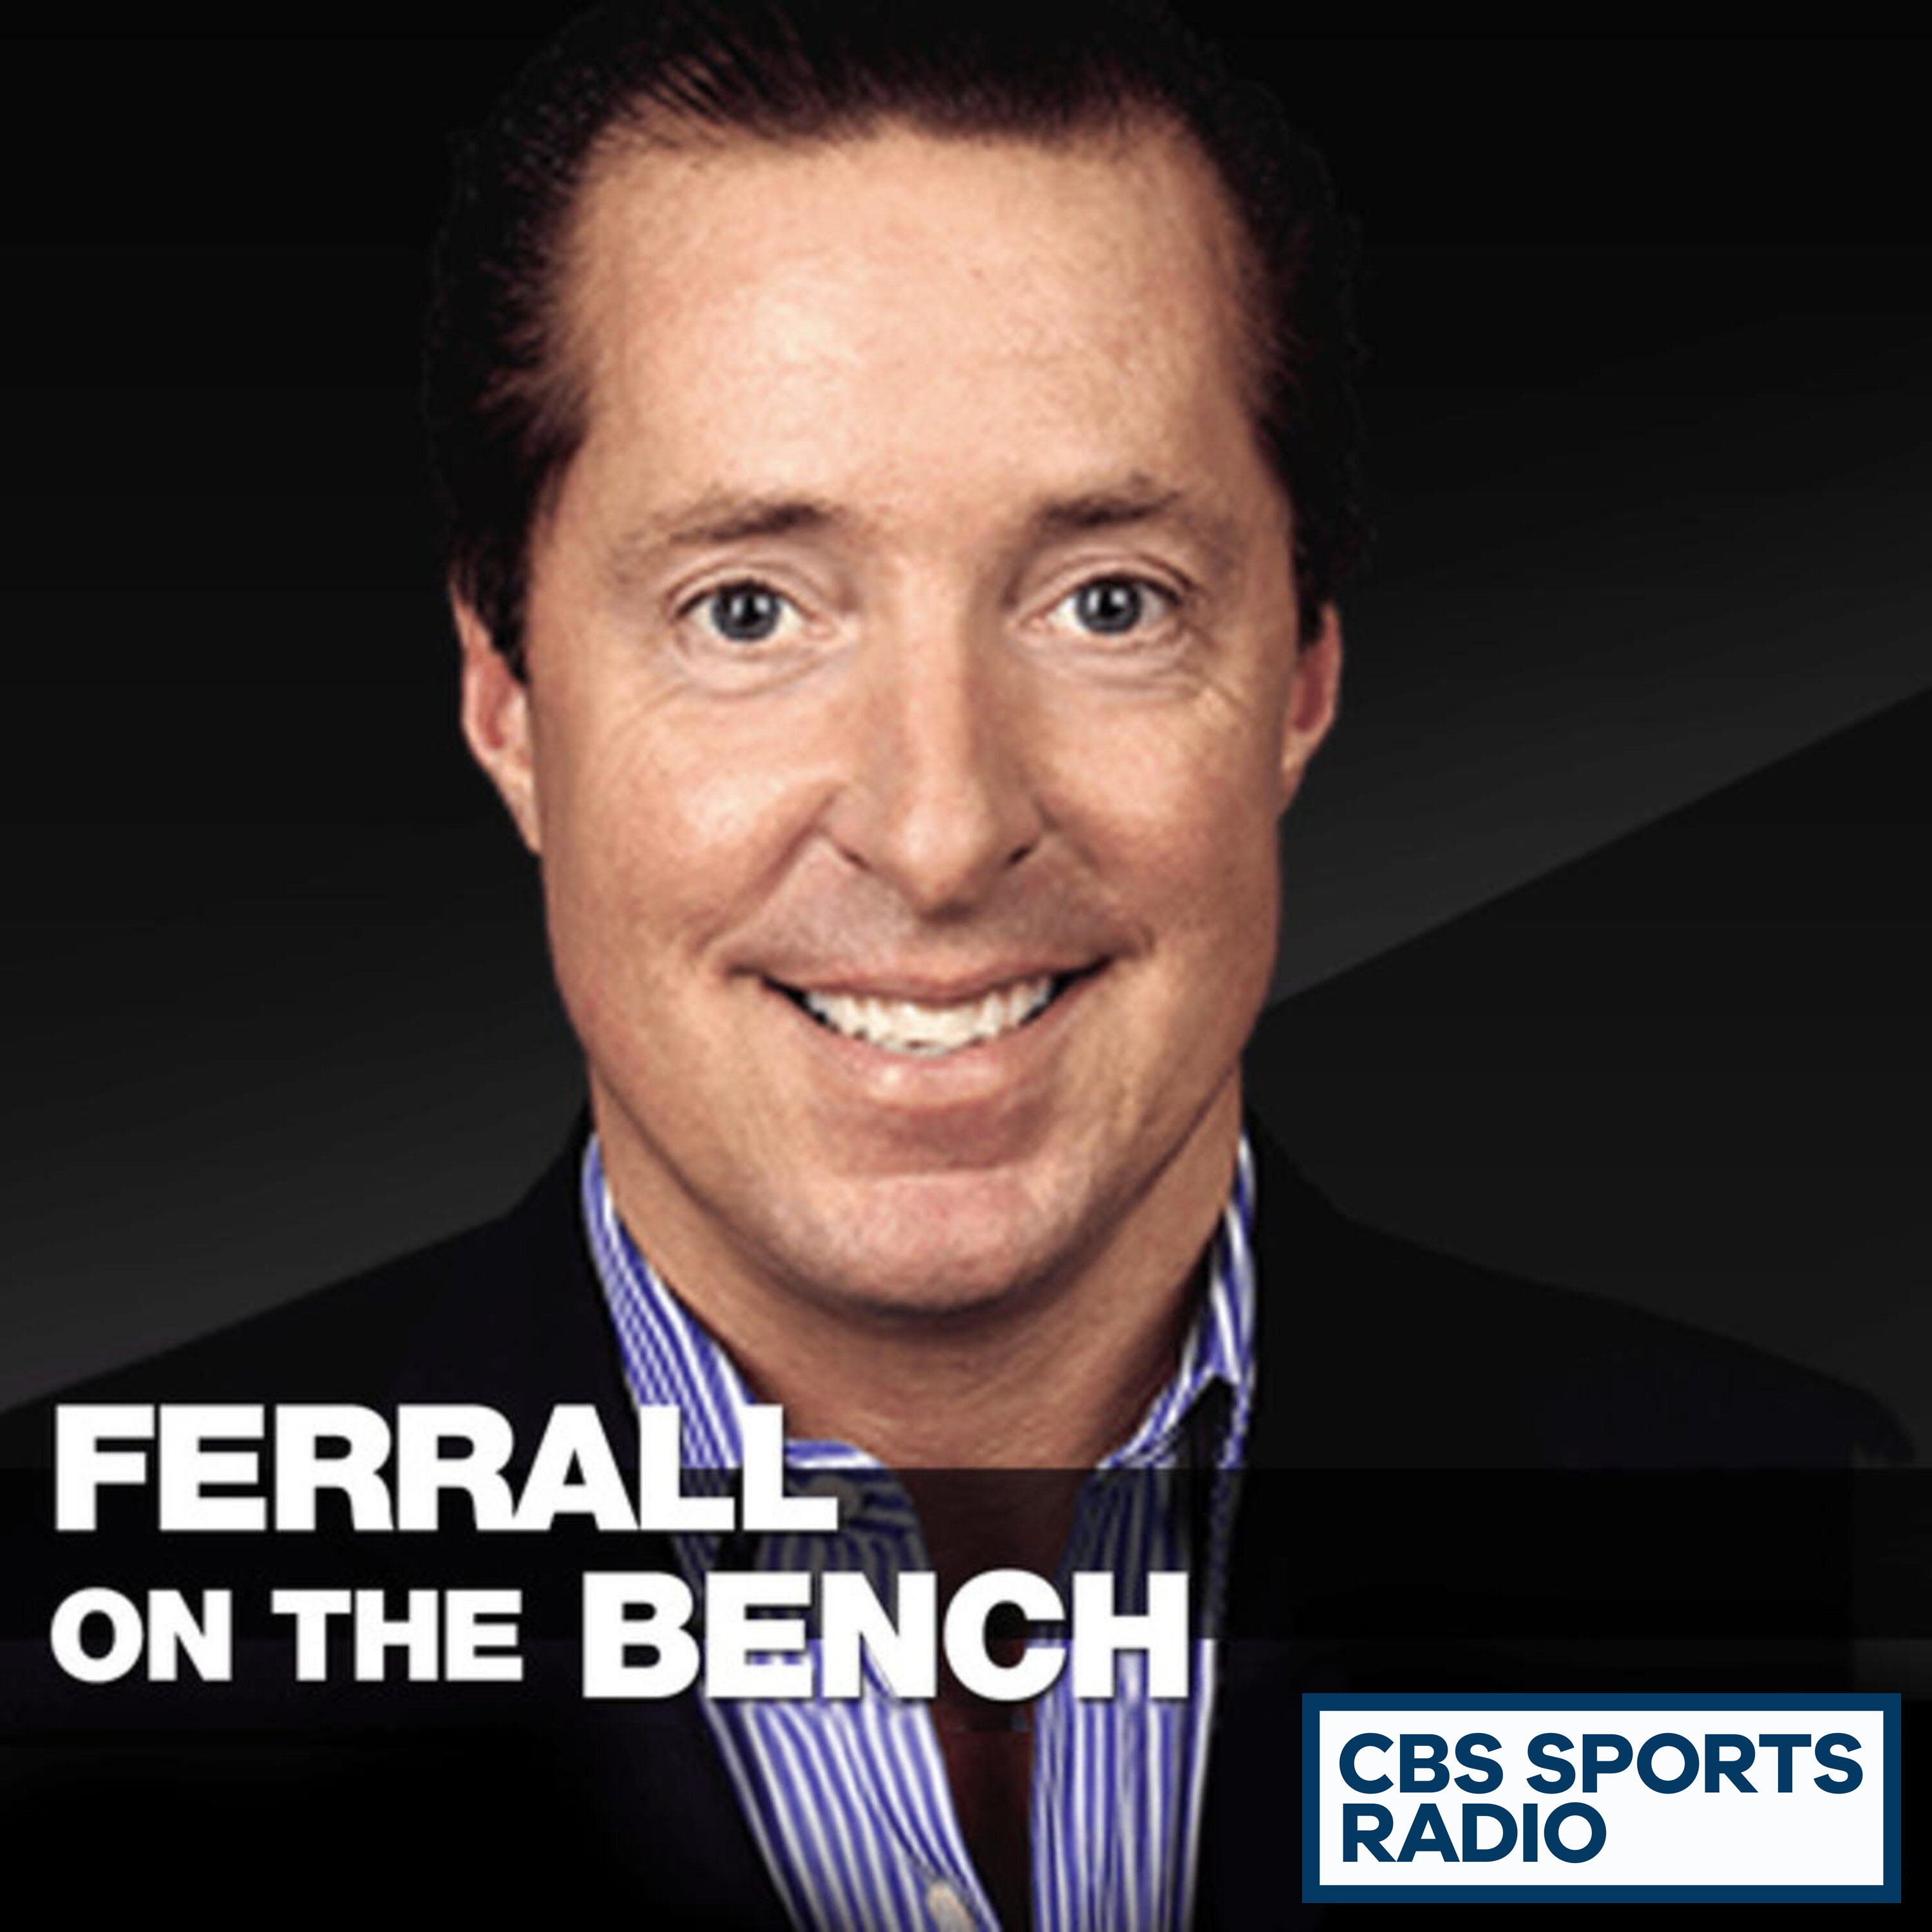 12-11-19 - Ferrall On The Bench - Brian Compton Interview